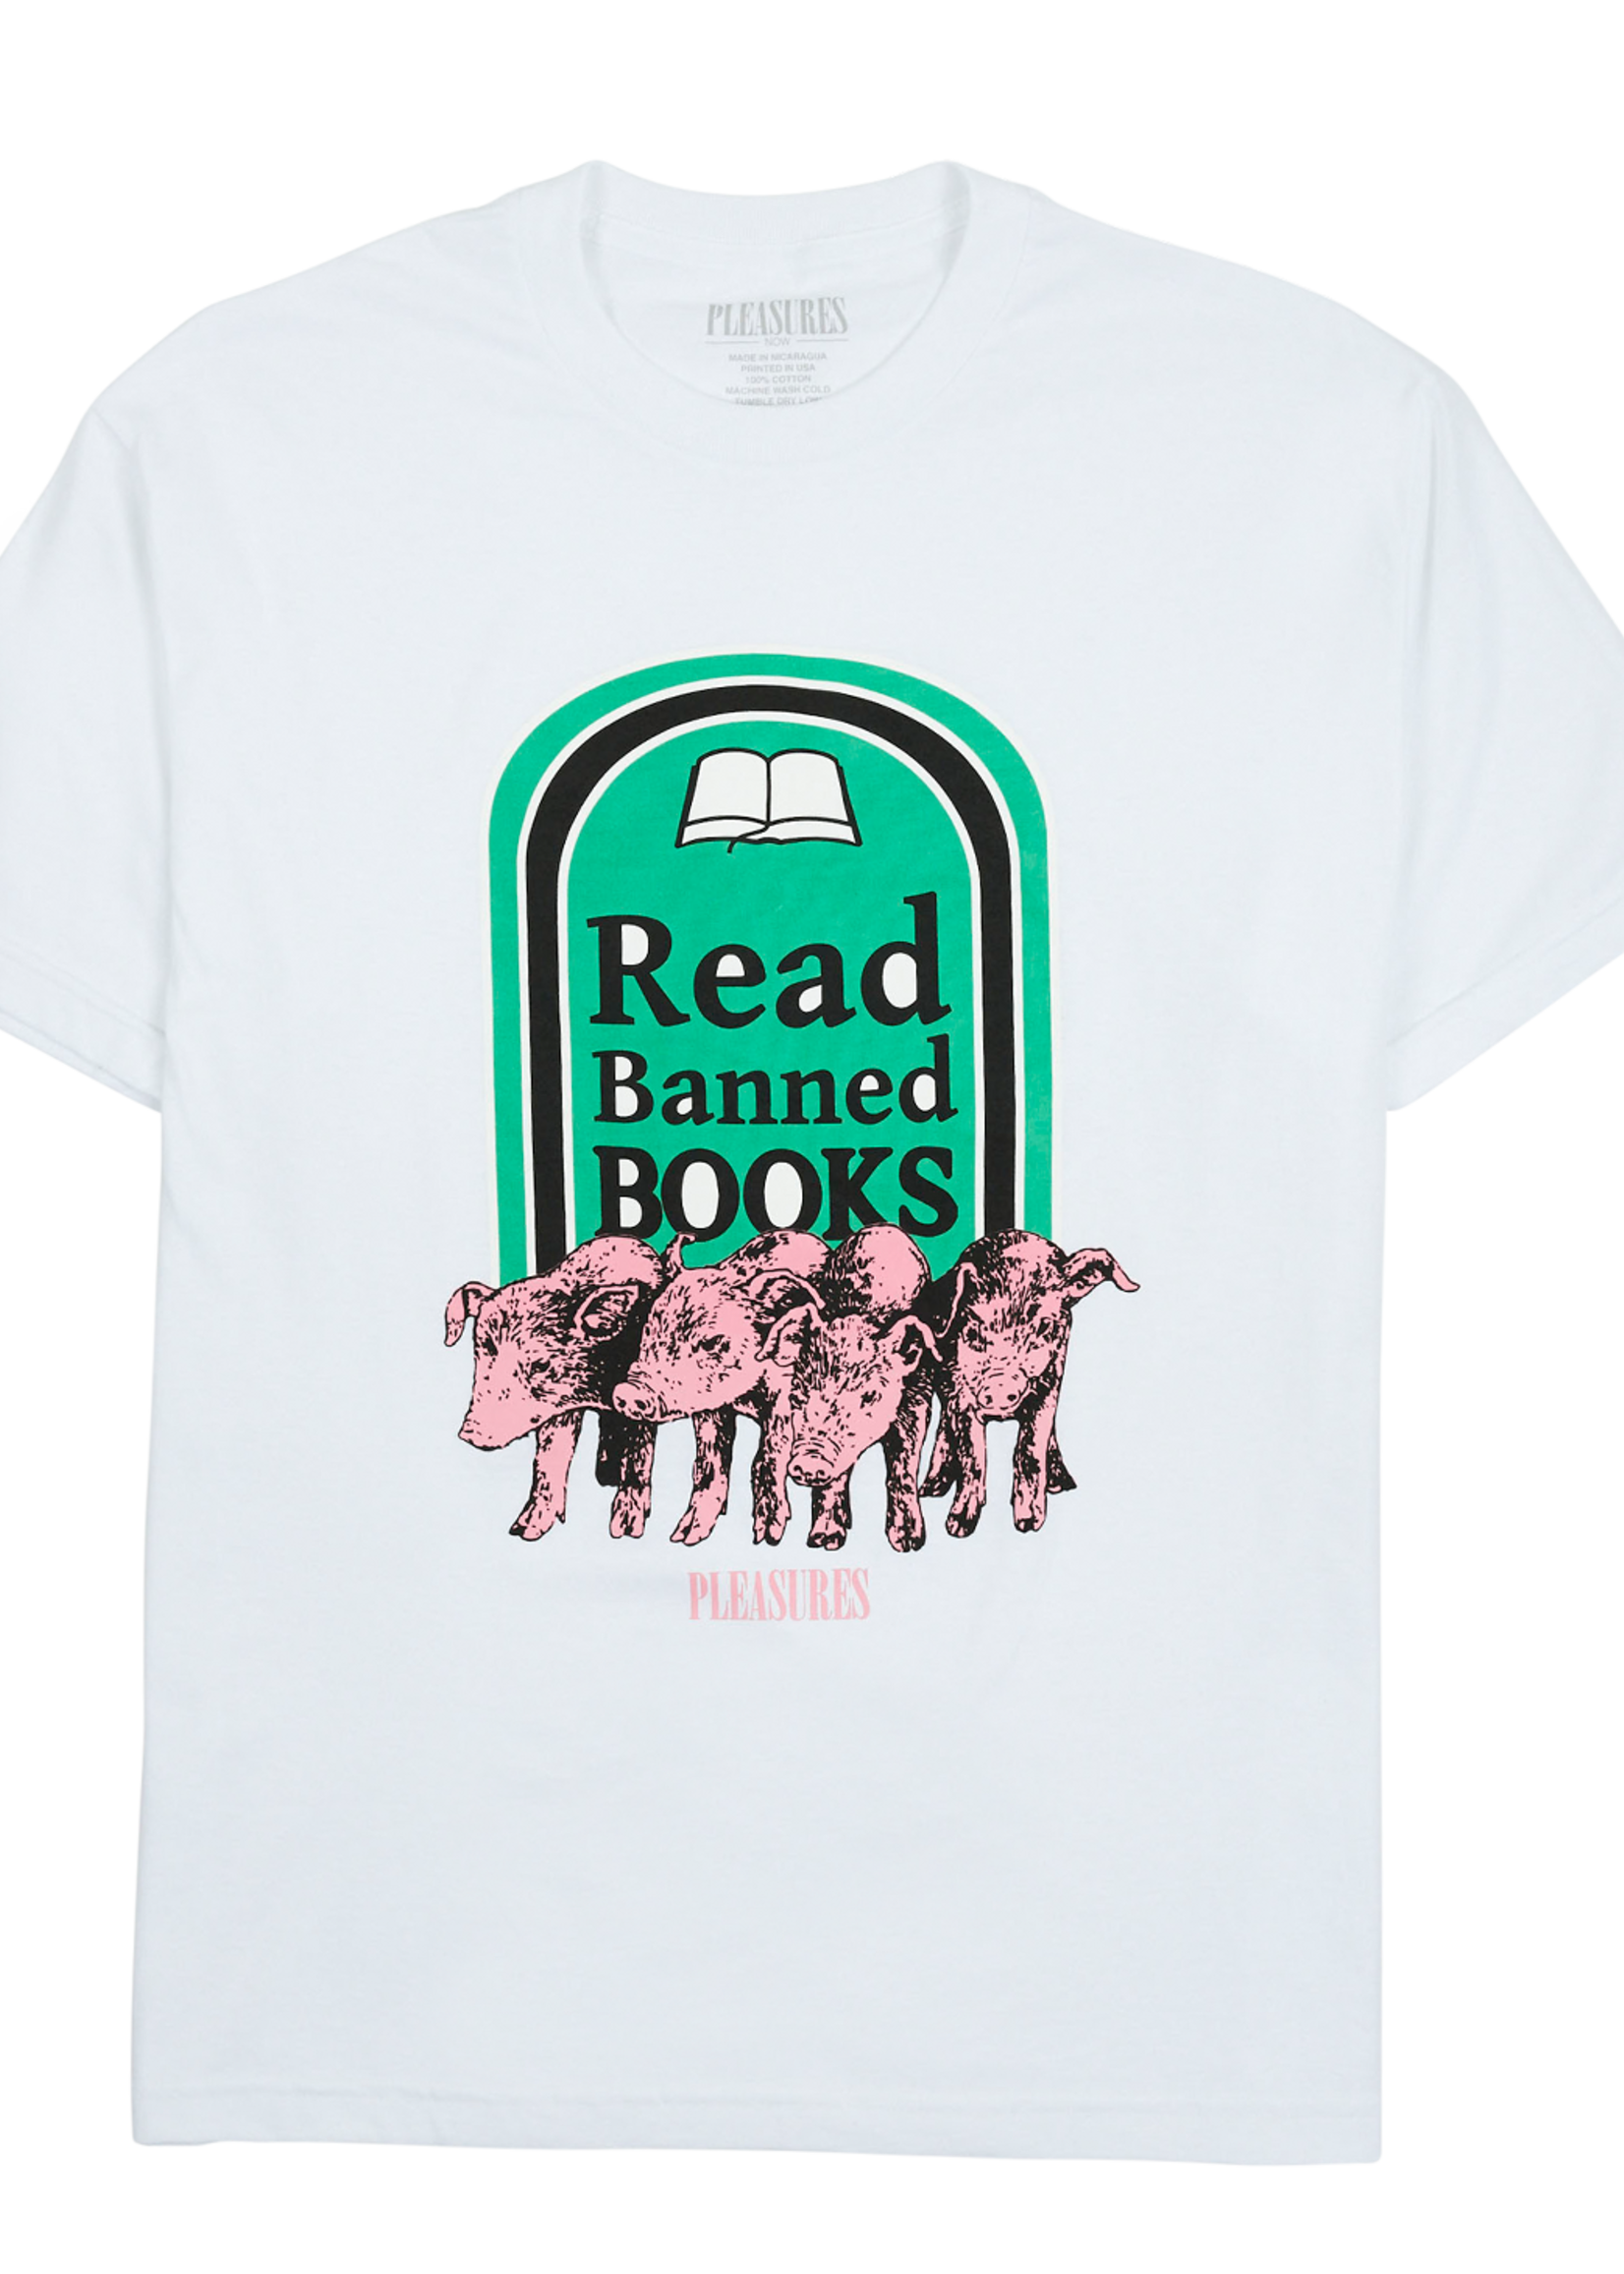 PLEASURES Banned Books T-shirt in White